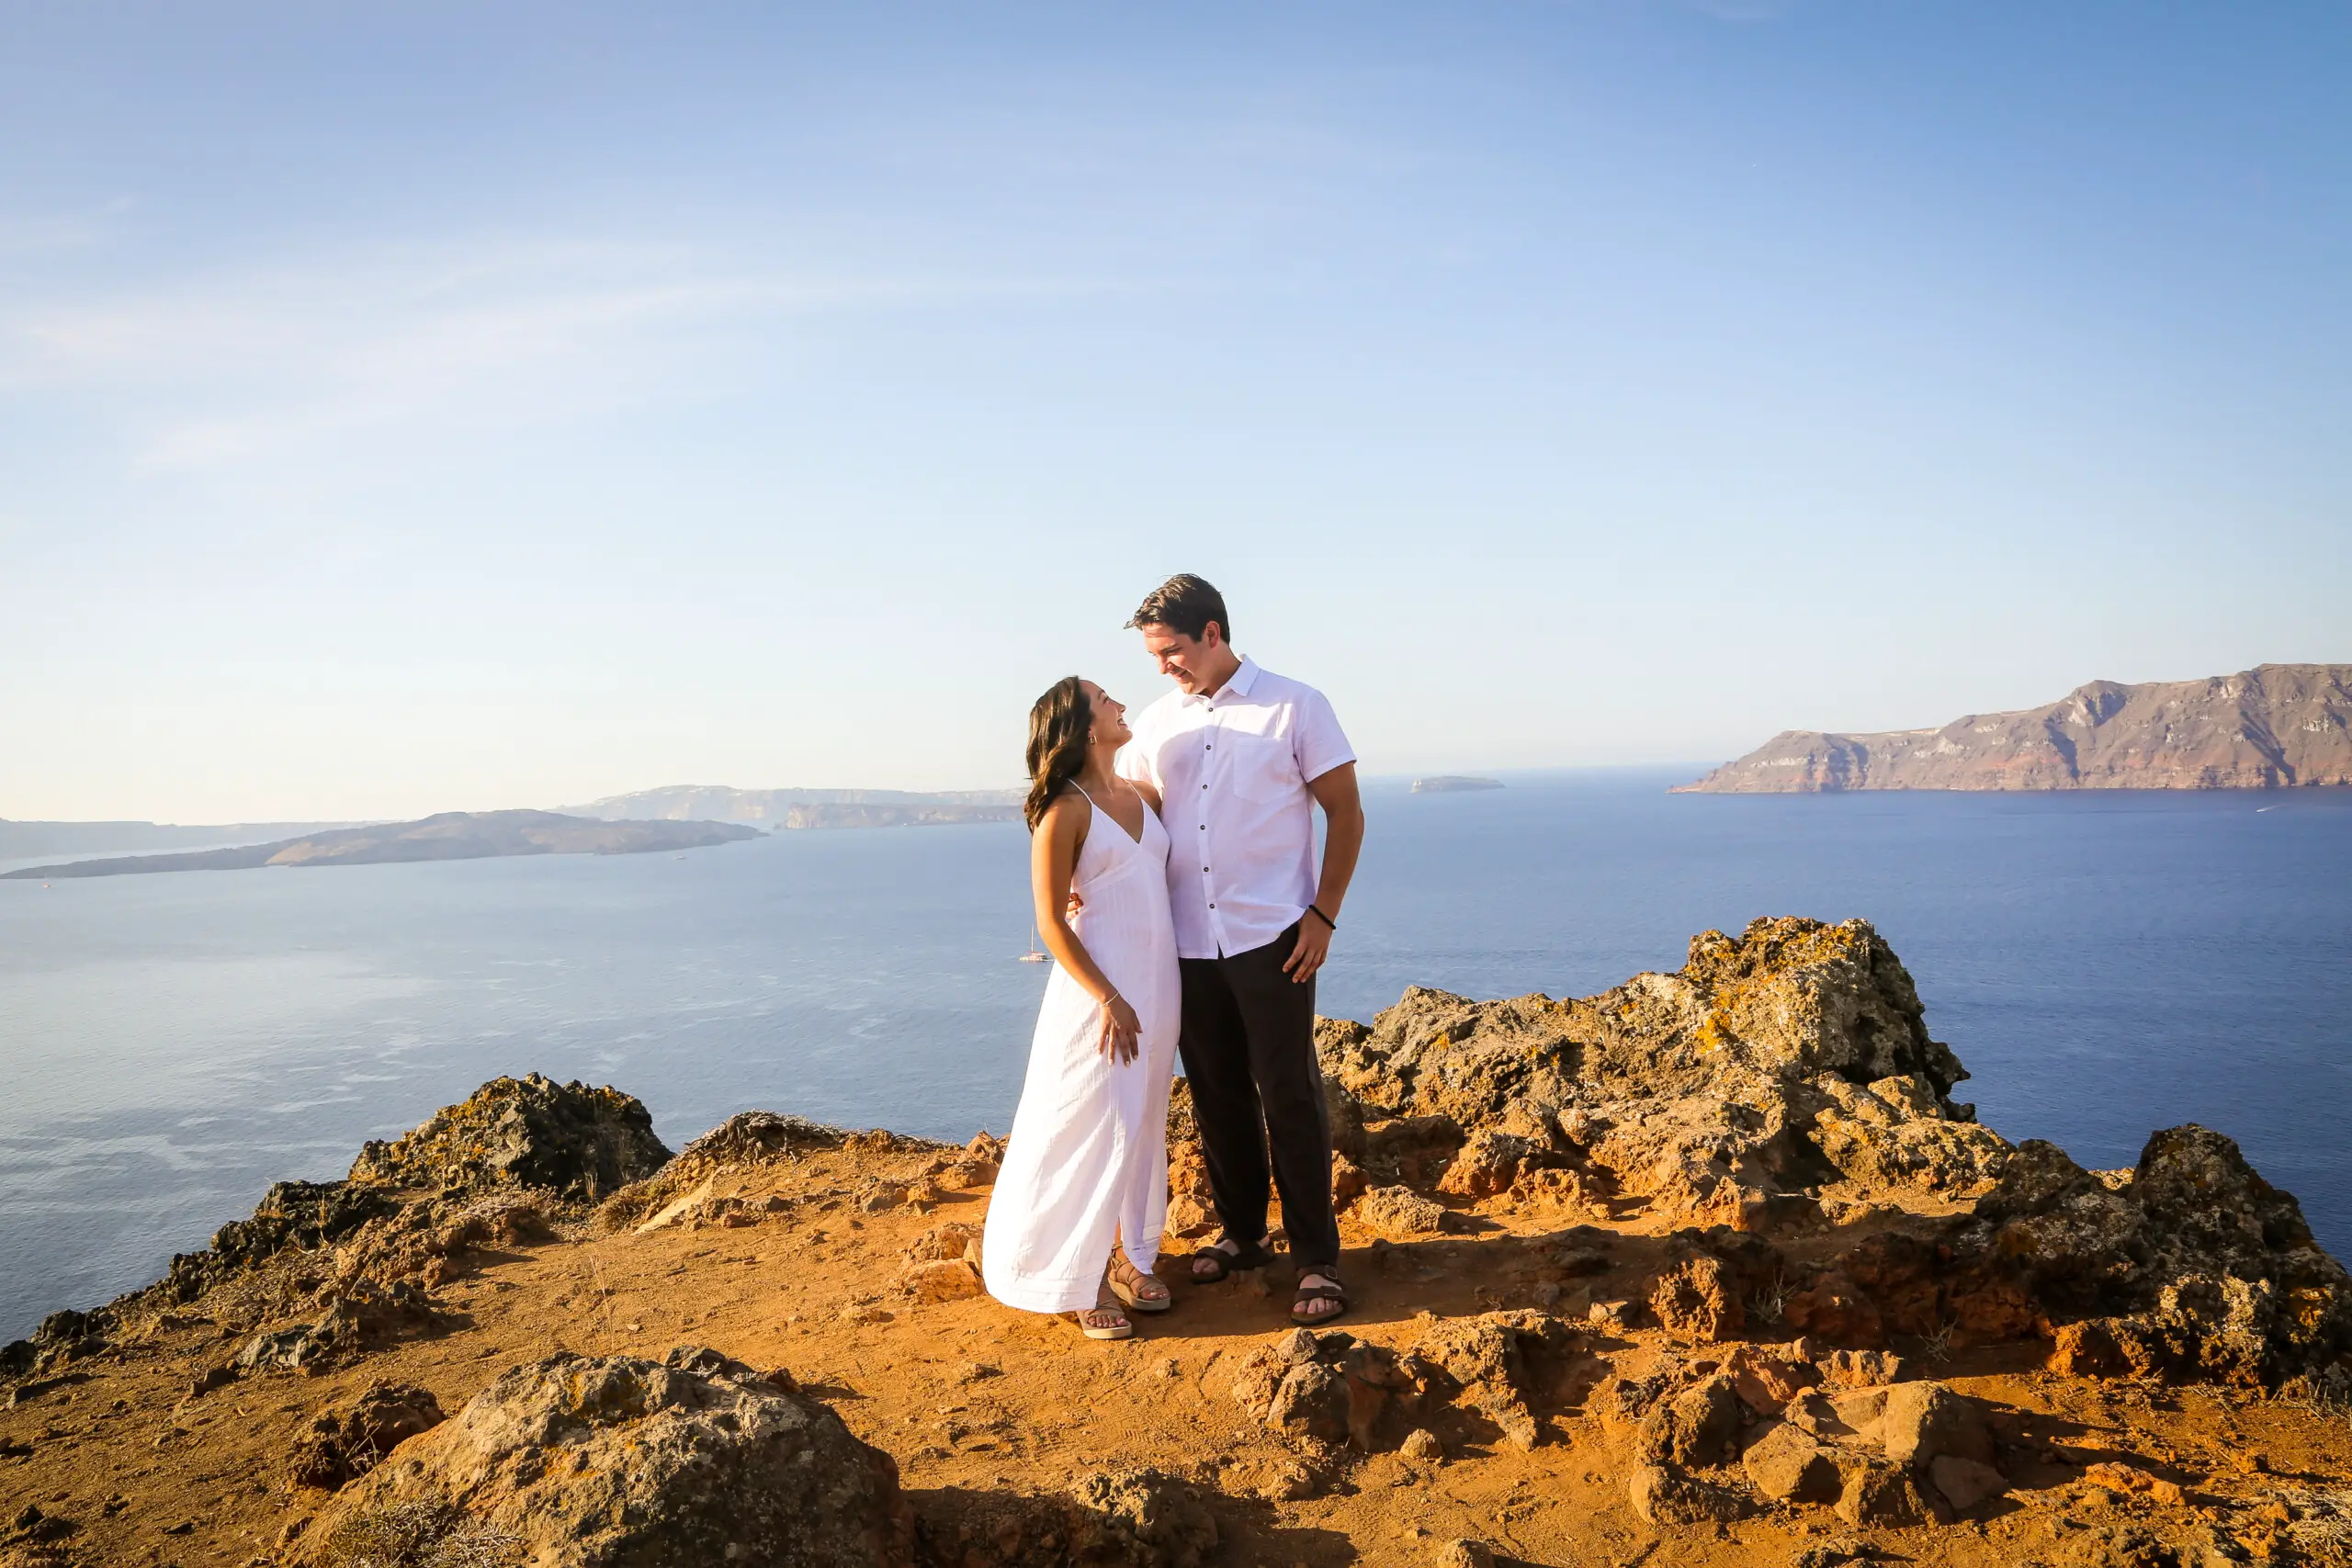 Engagement photoshoot by Athanasios, Localgrapher in Santorini